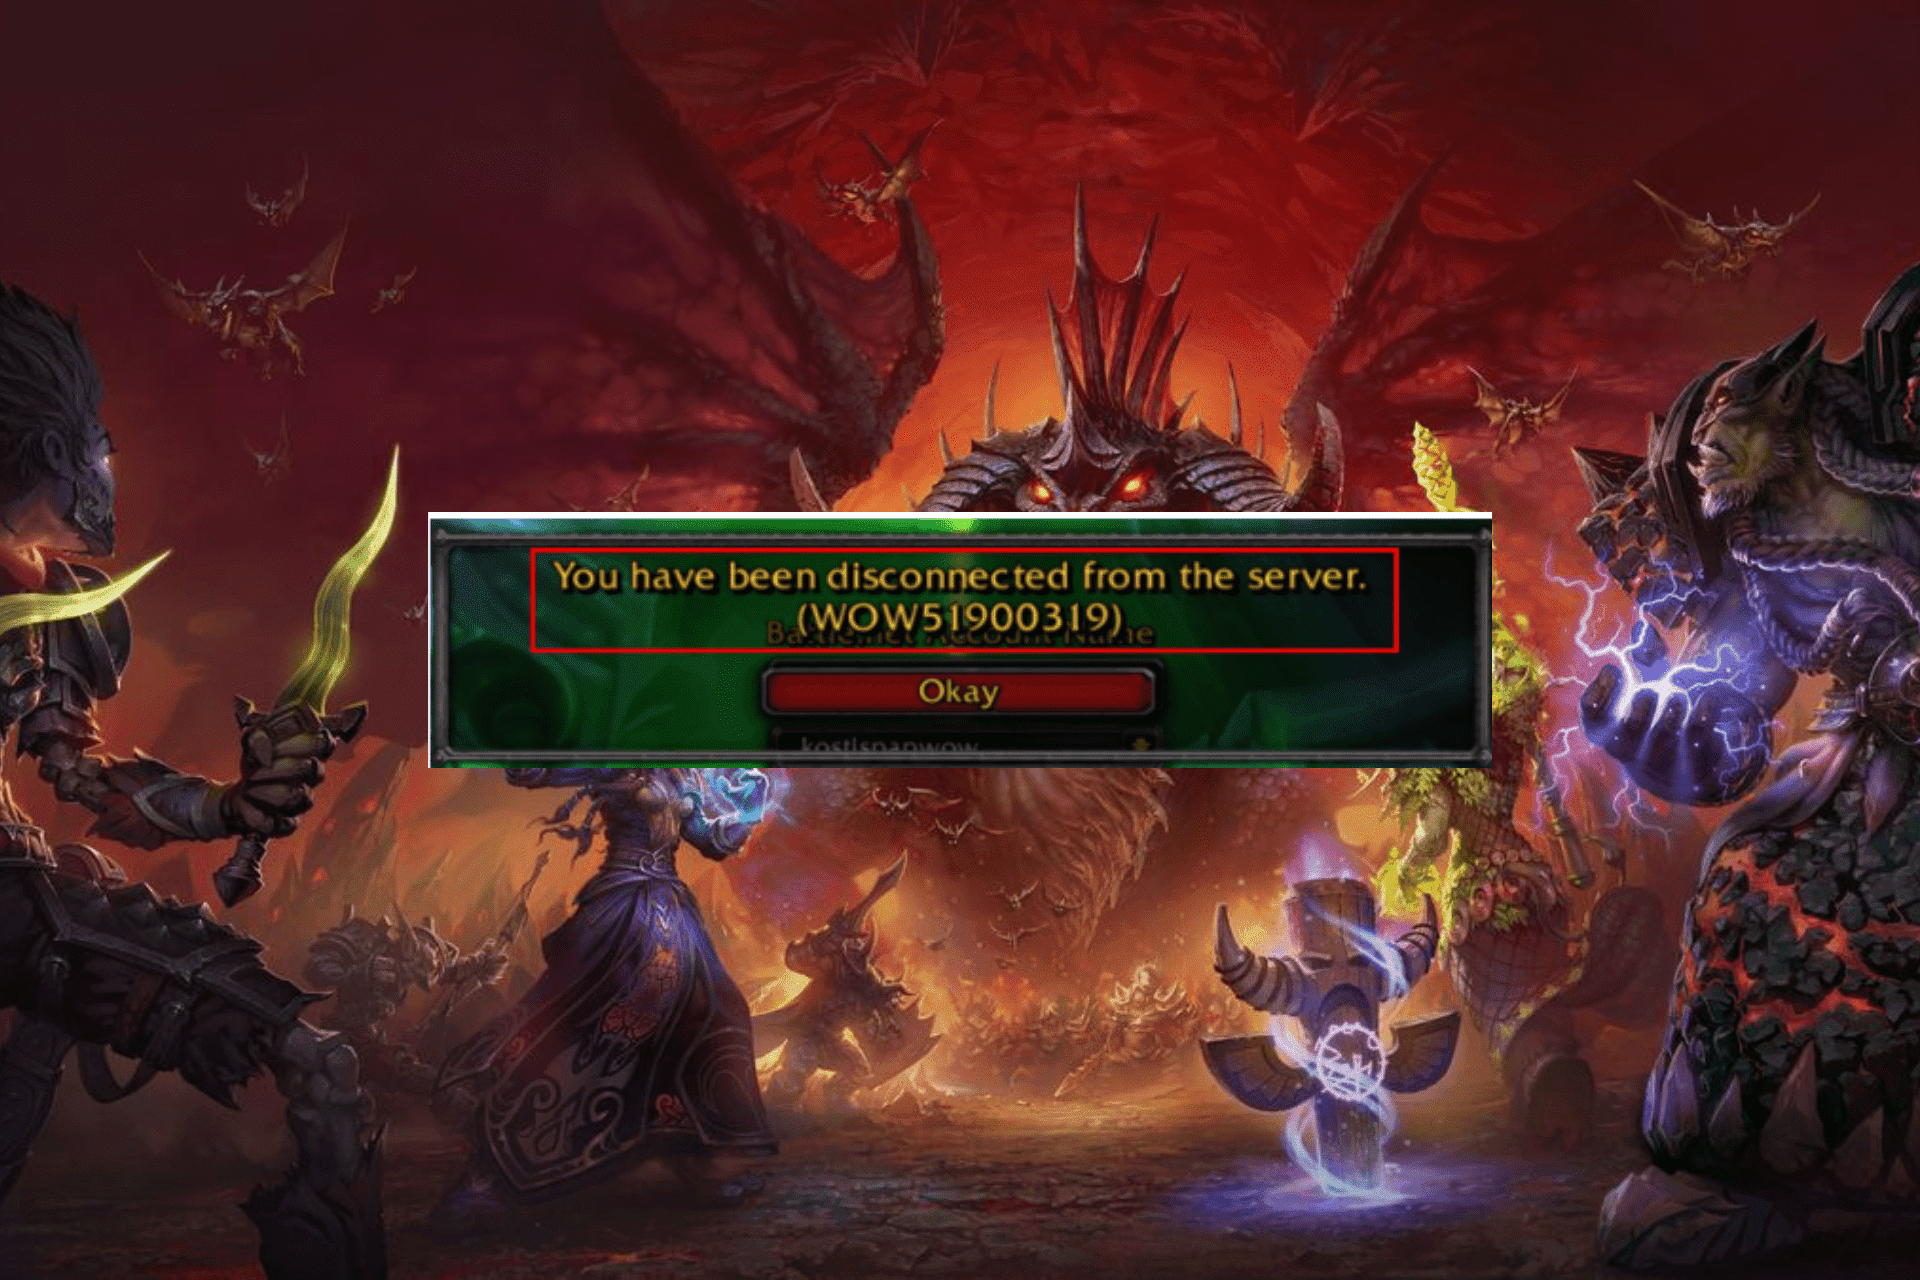 How To Fix World of Warcraft Slow Download Issue